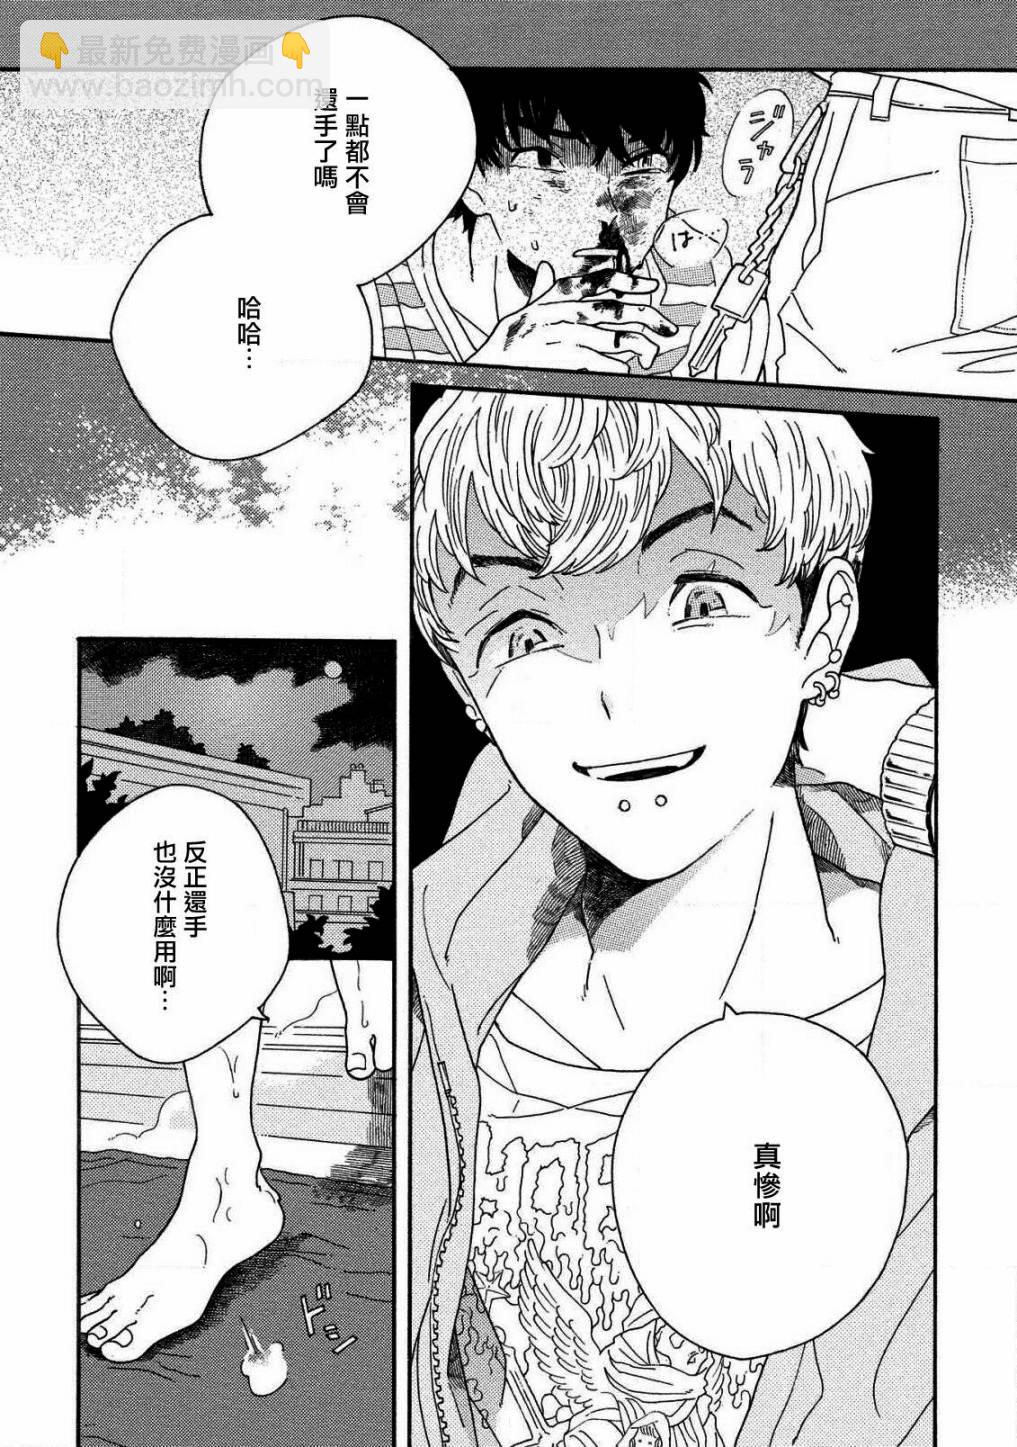 Sneaky Red - 第01話 - 1